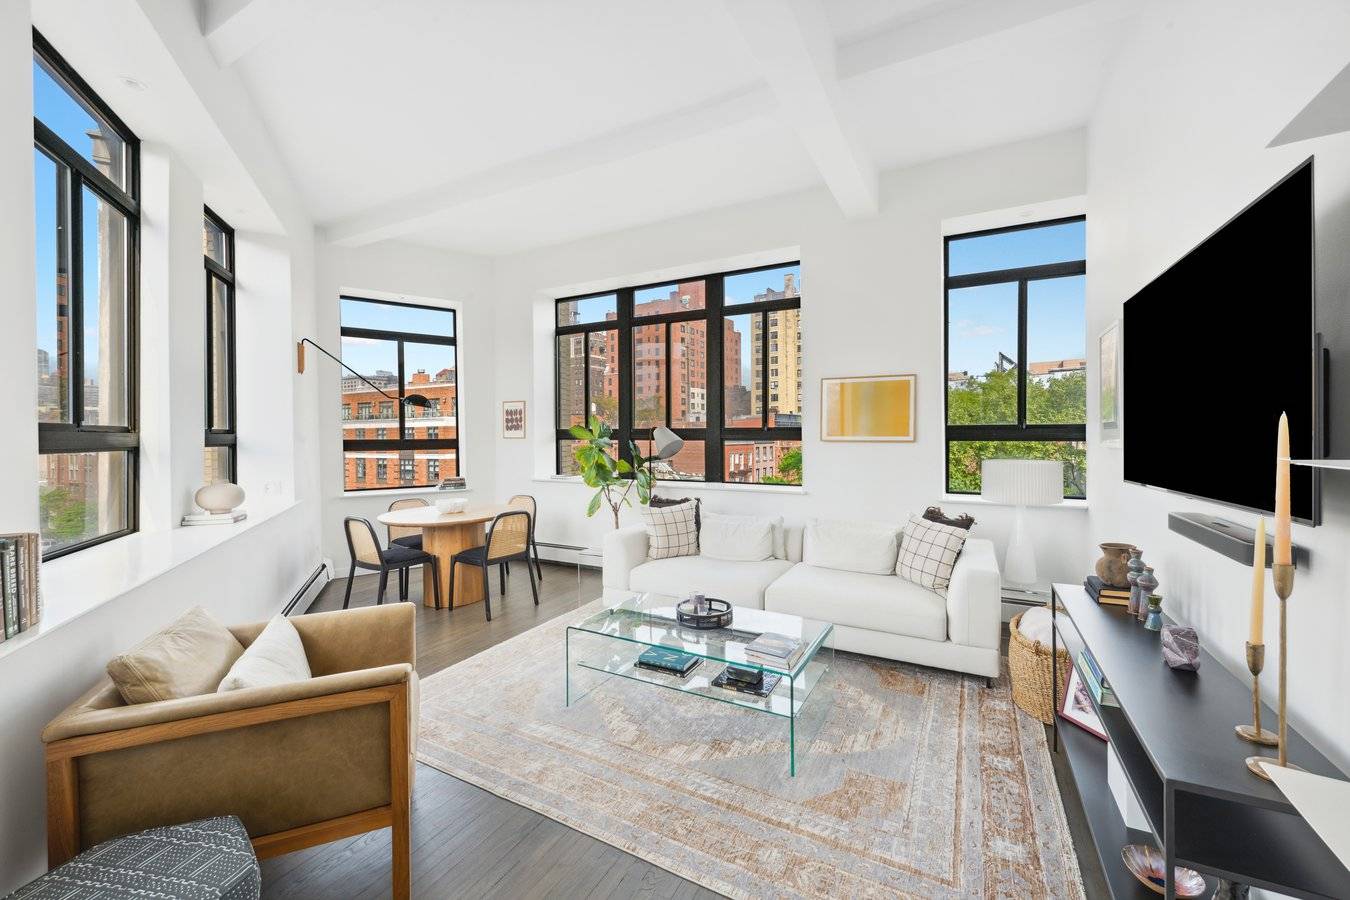 Come view and fall in love with this renovated 2 bedroom 2 bathroom corner loft with 19 windows and 3 exposures including direct views of the Empire State Building.